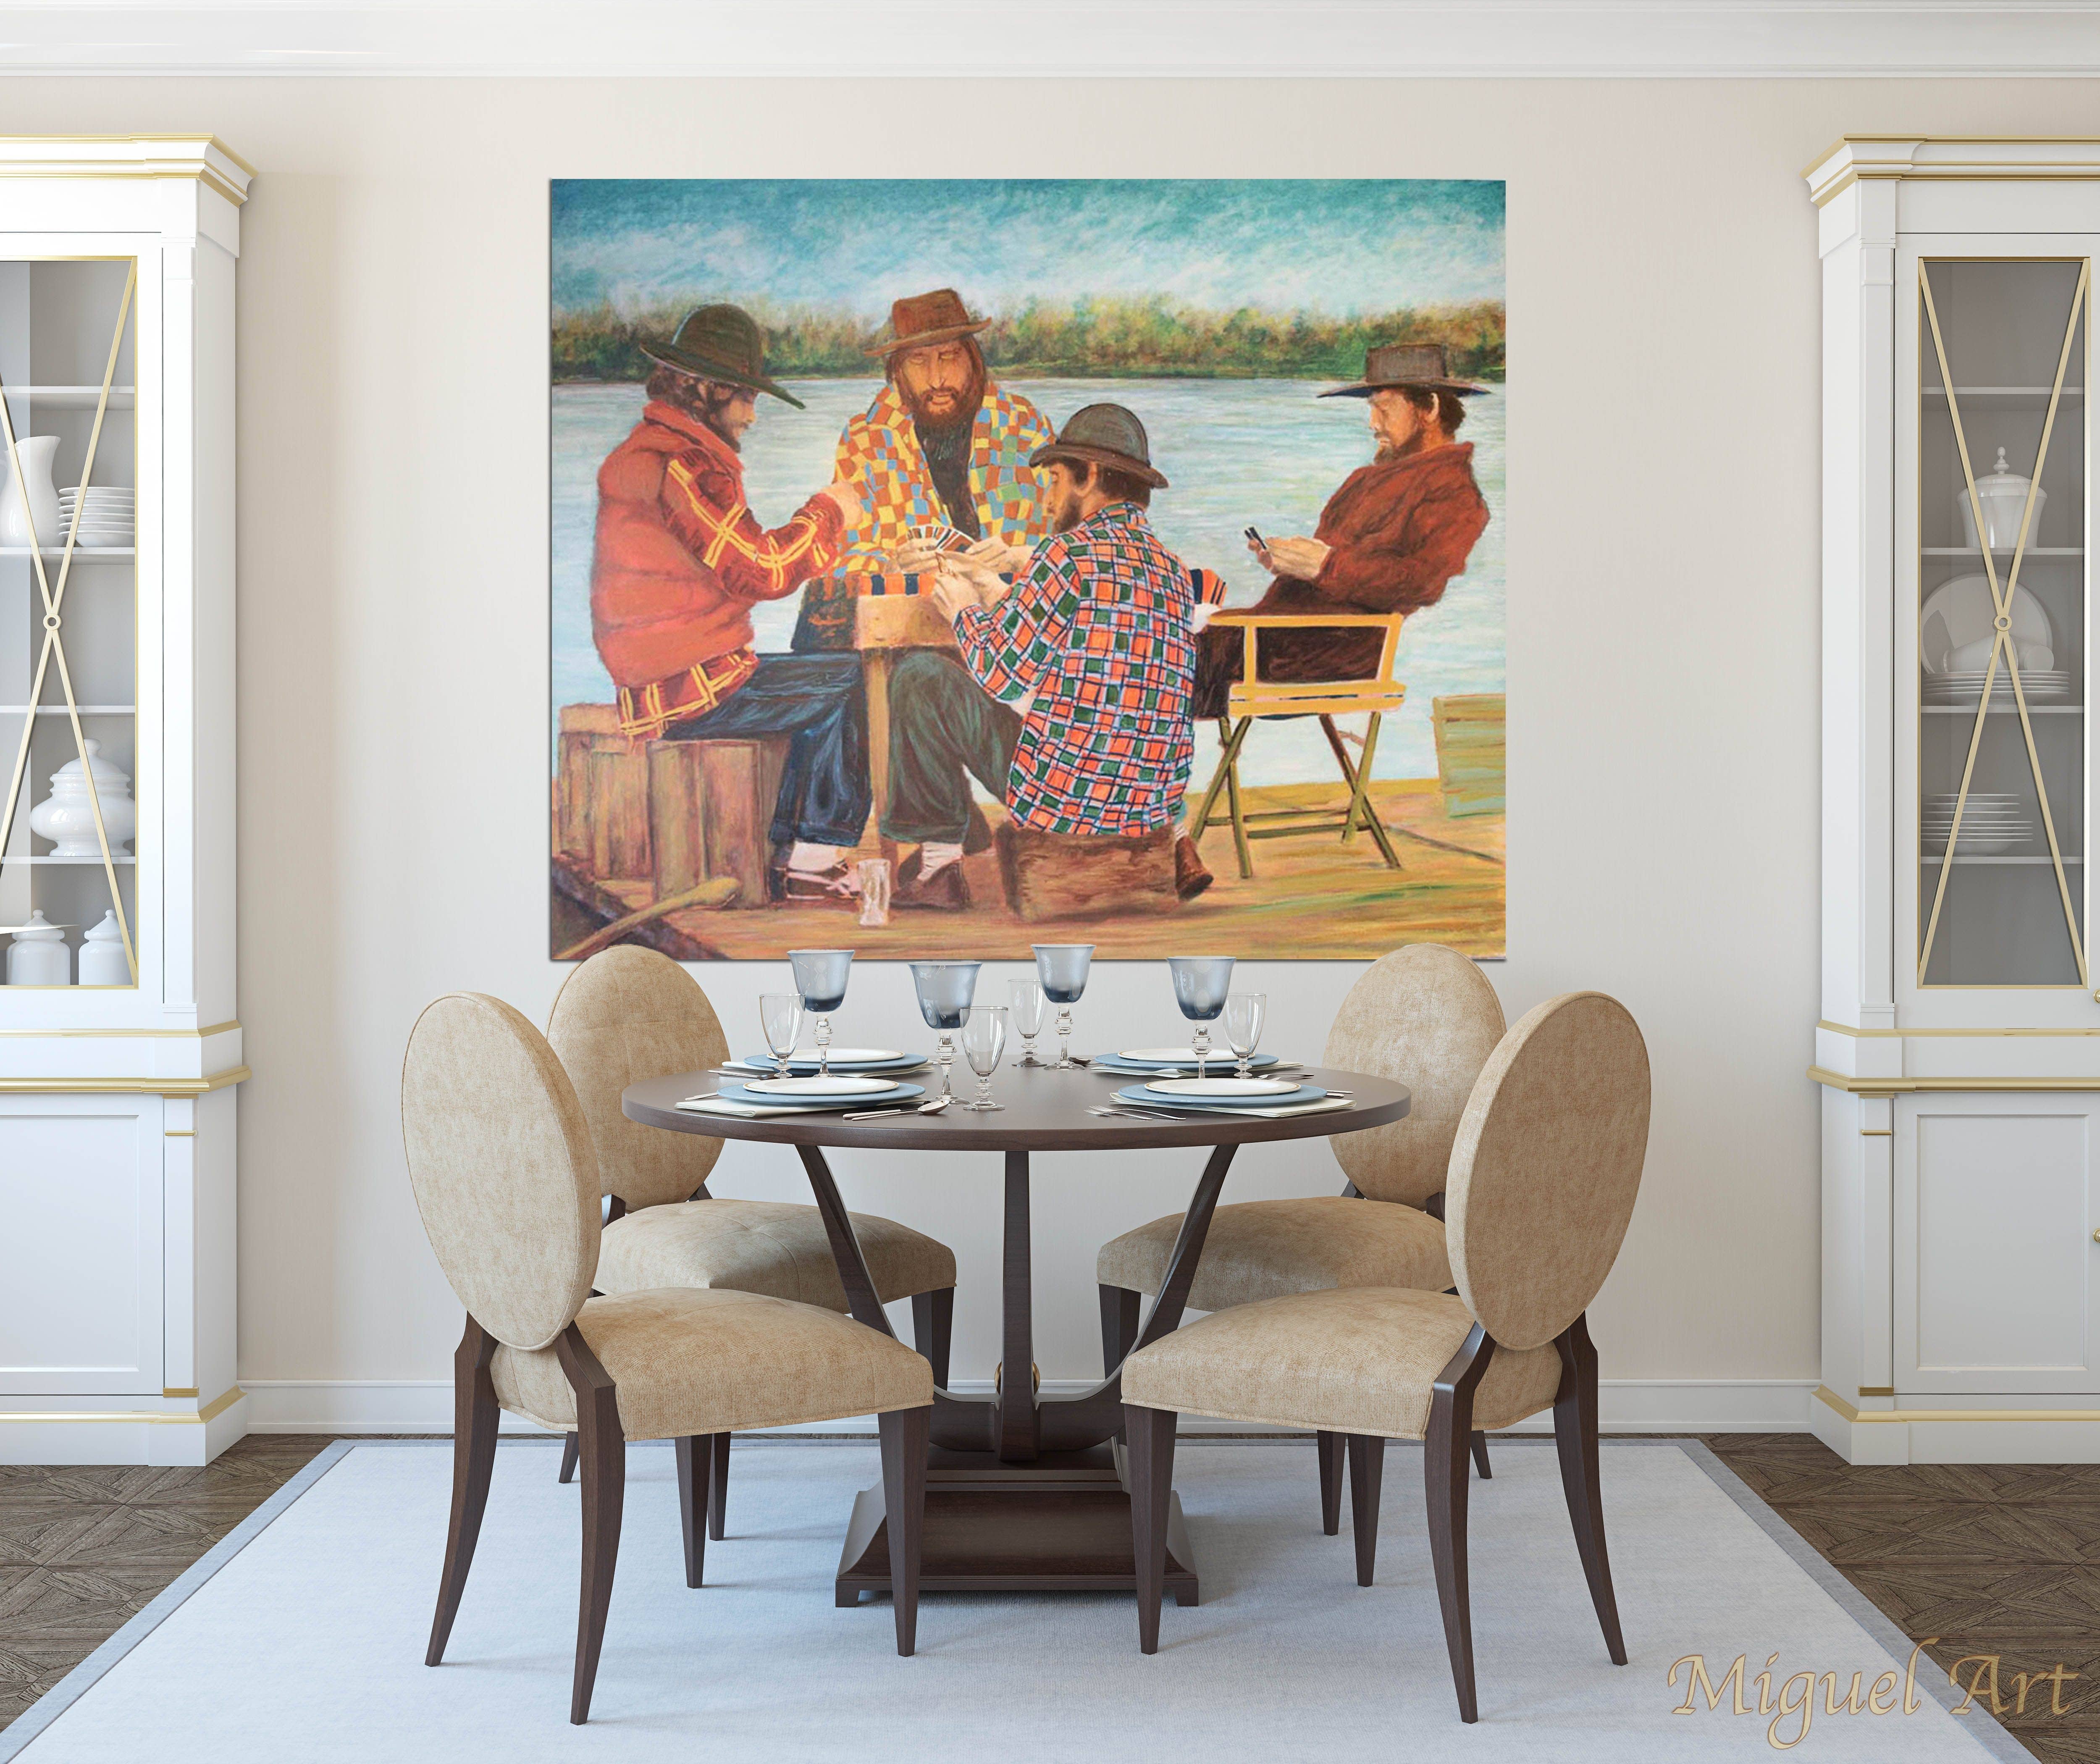 Painting of Jugadores de Cartas displayed in a dining room on a cream wall